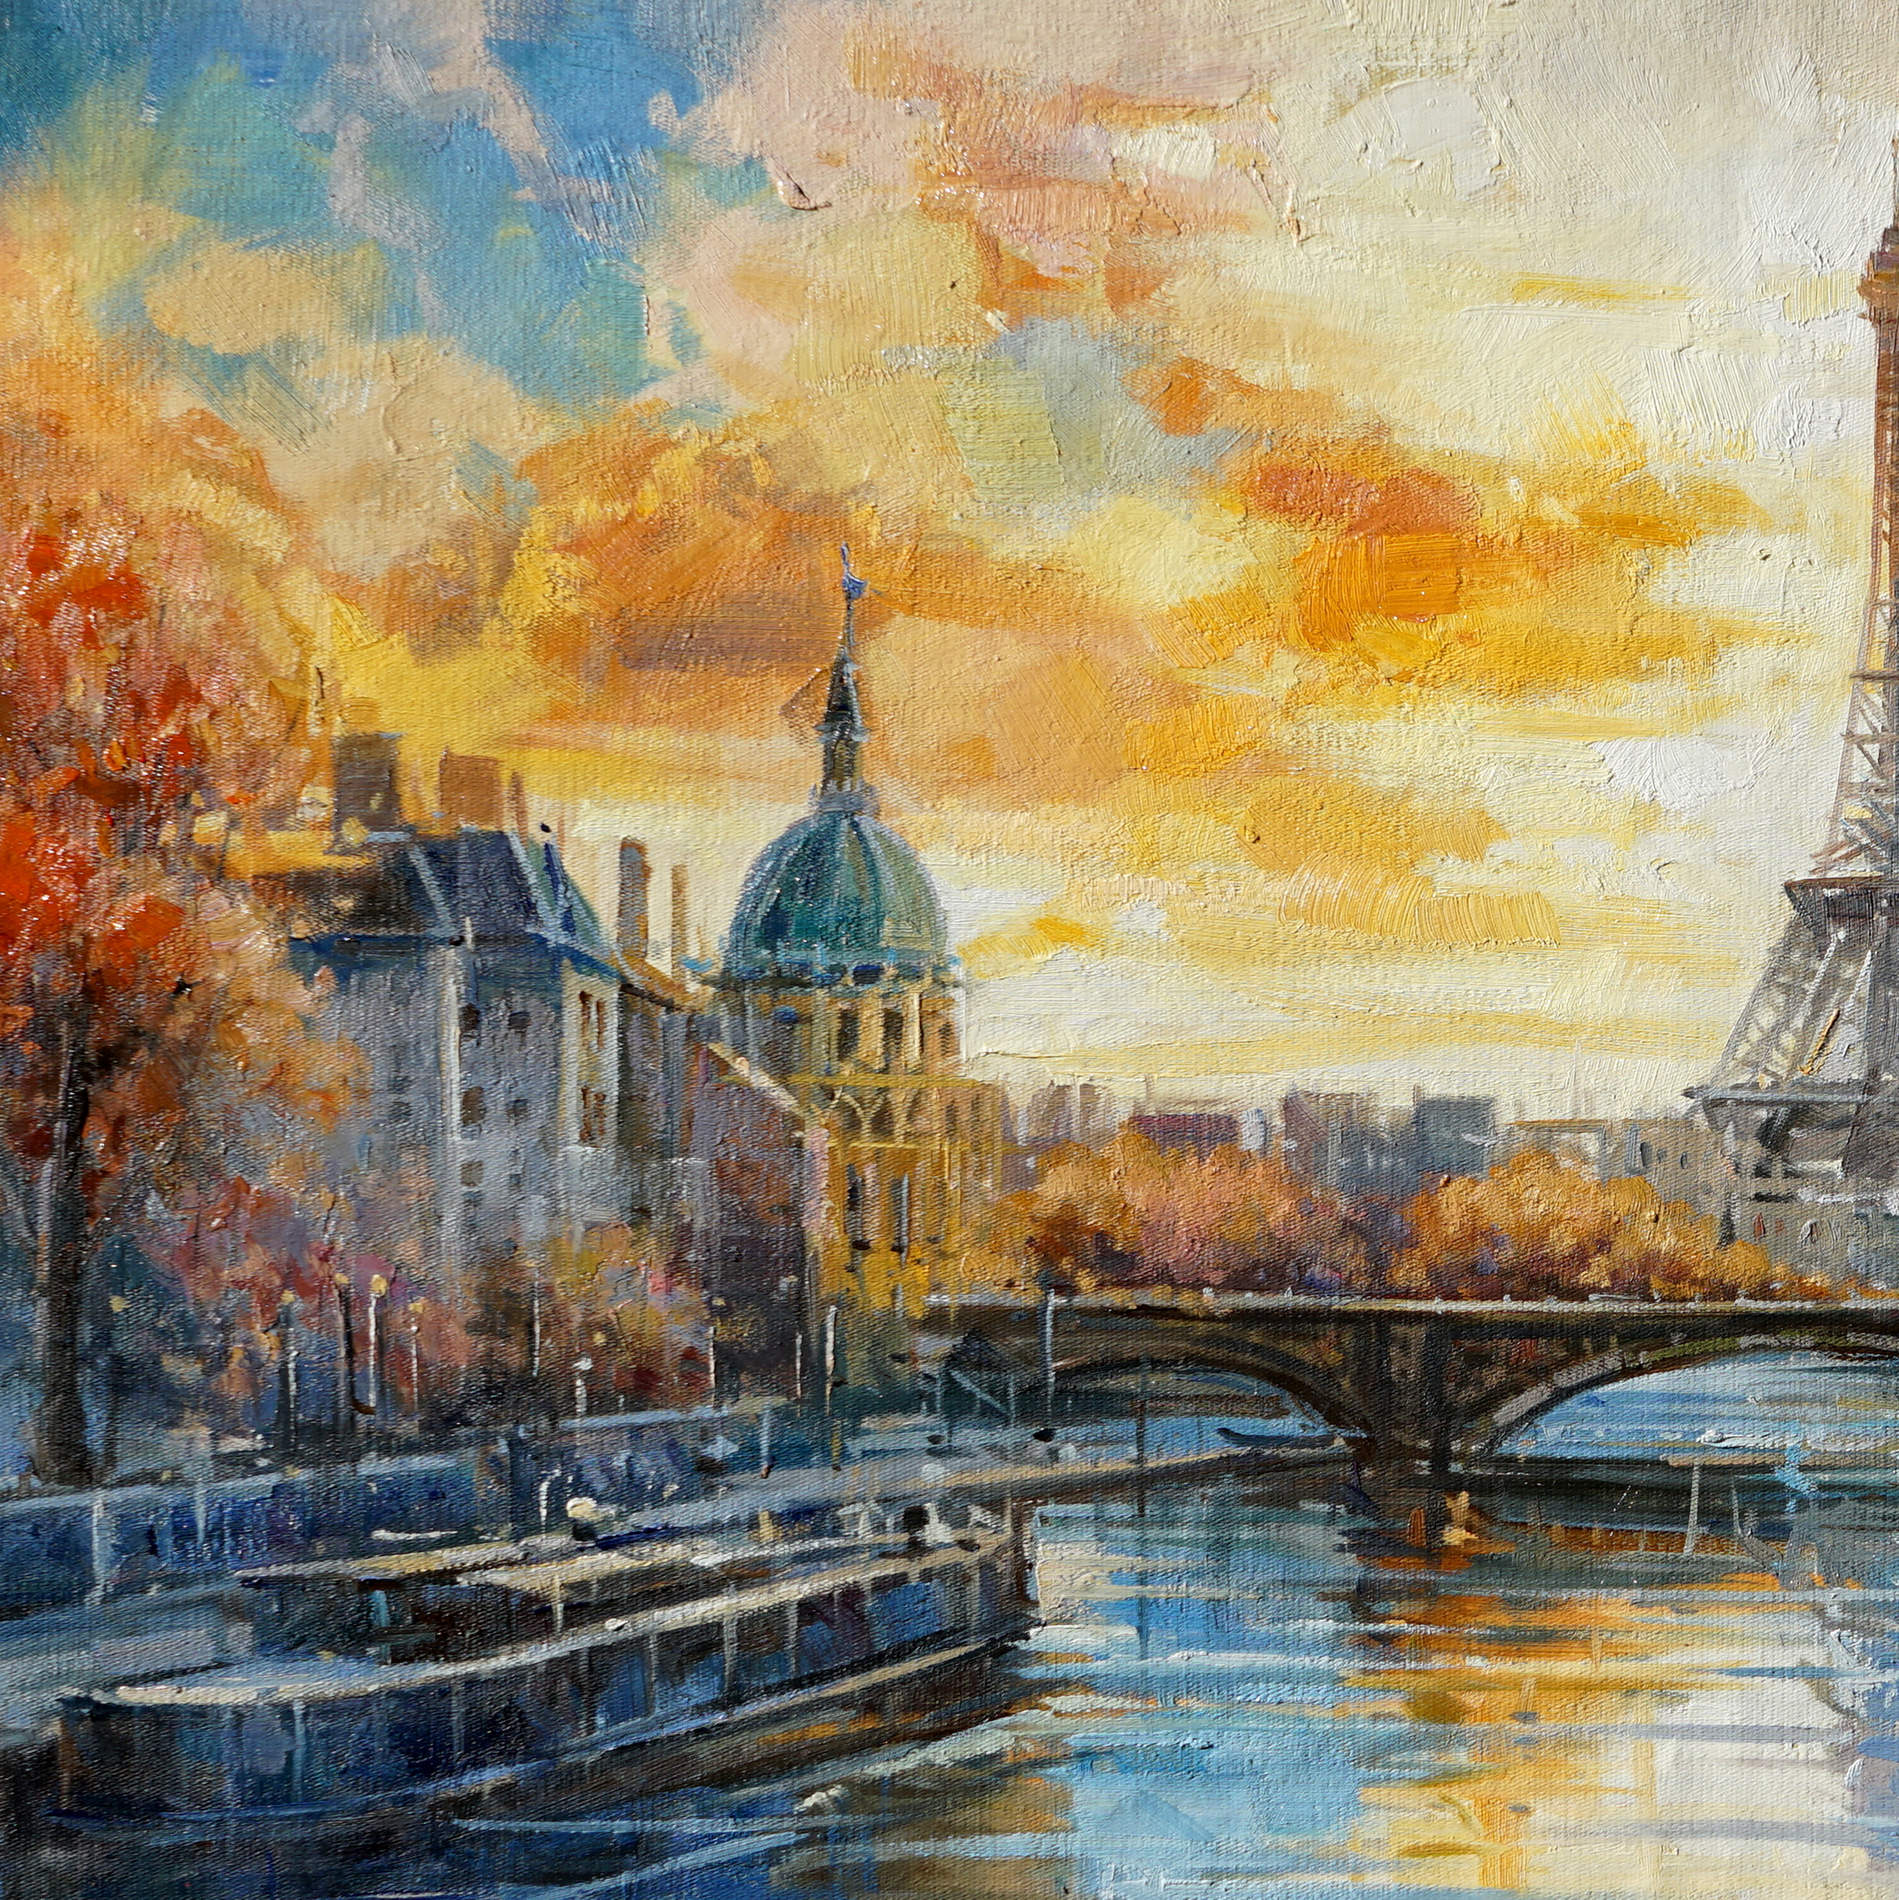 Hand painted Sunset over the Seine in Paris 60x120cm